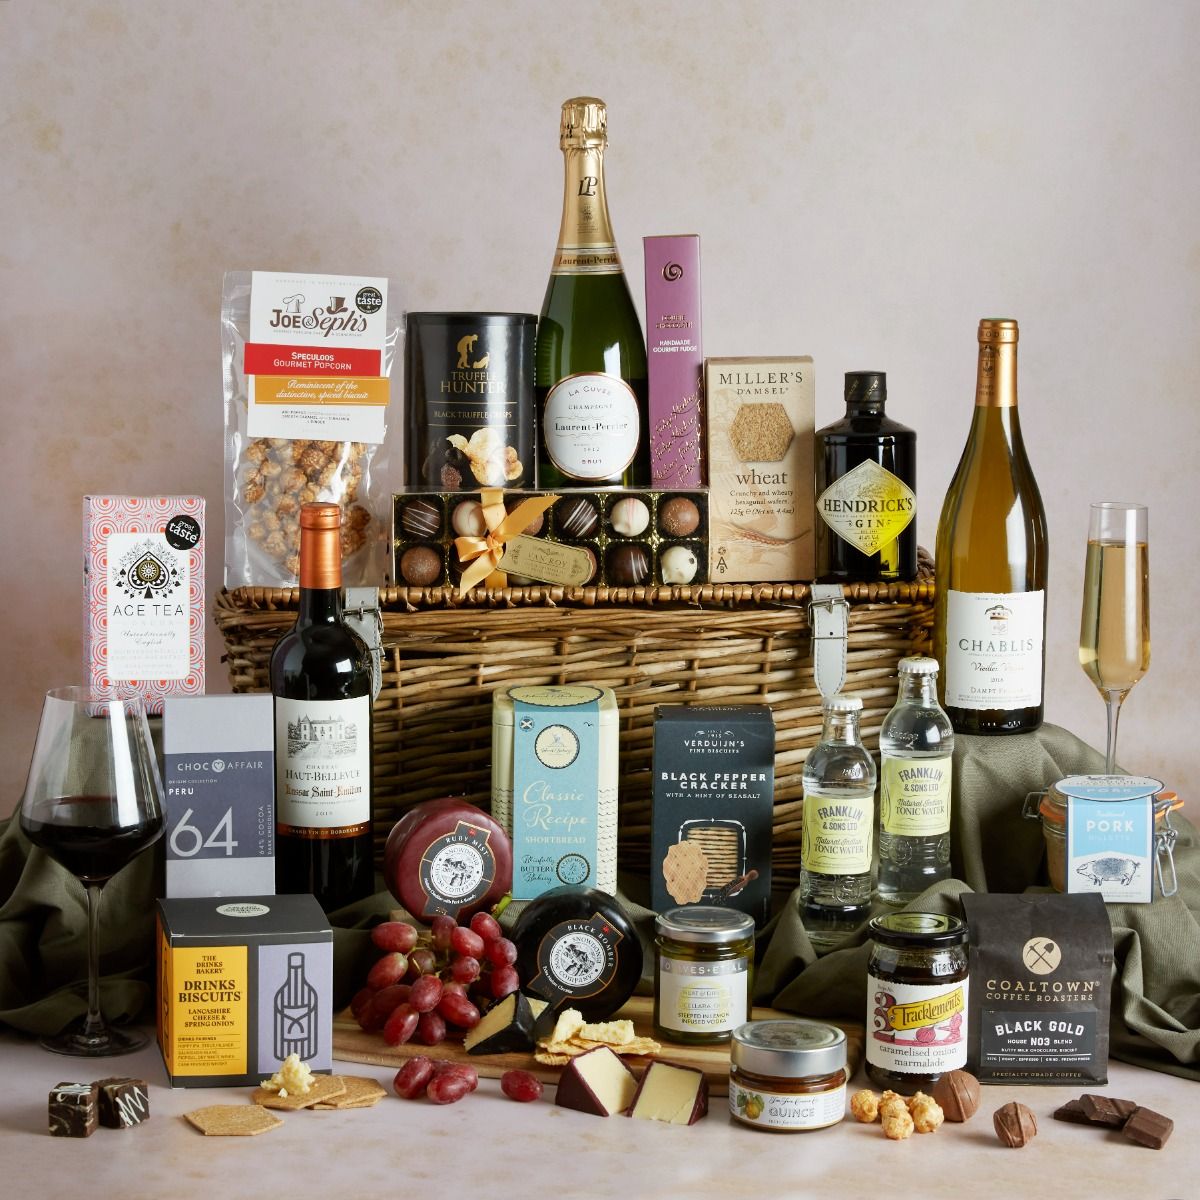  The Grand Food & Wine Hamper with contents on display